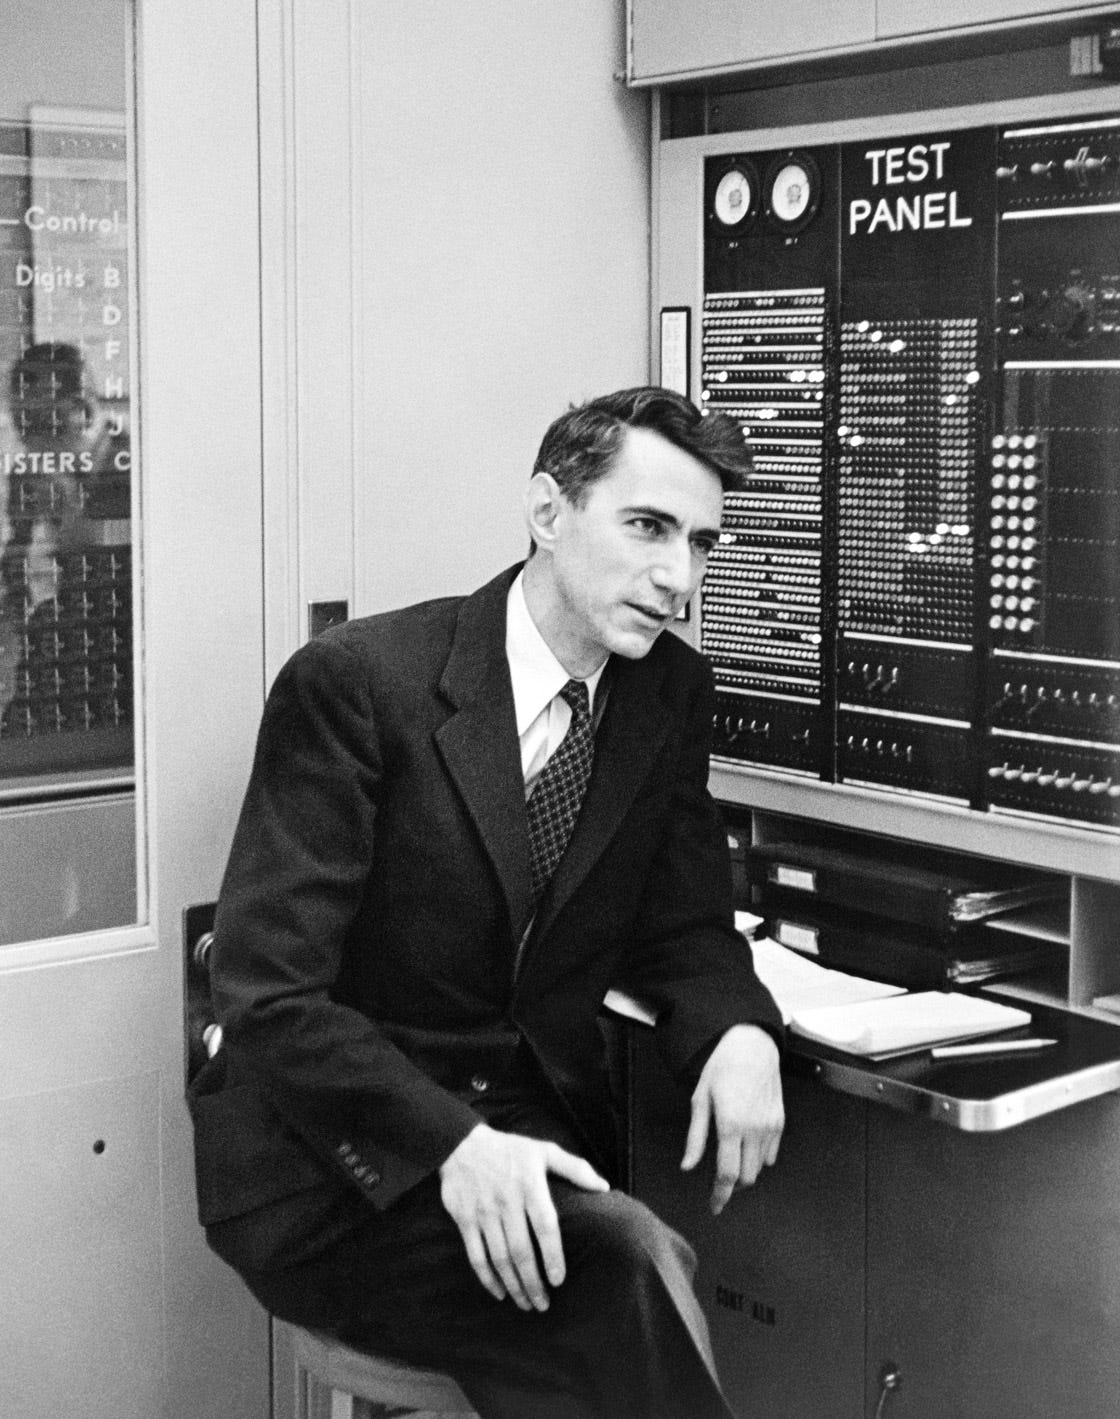 A black-and-white photo of a man sitting in front of an early computer.